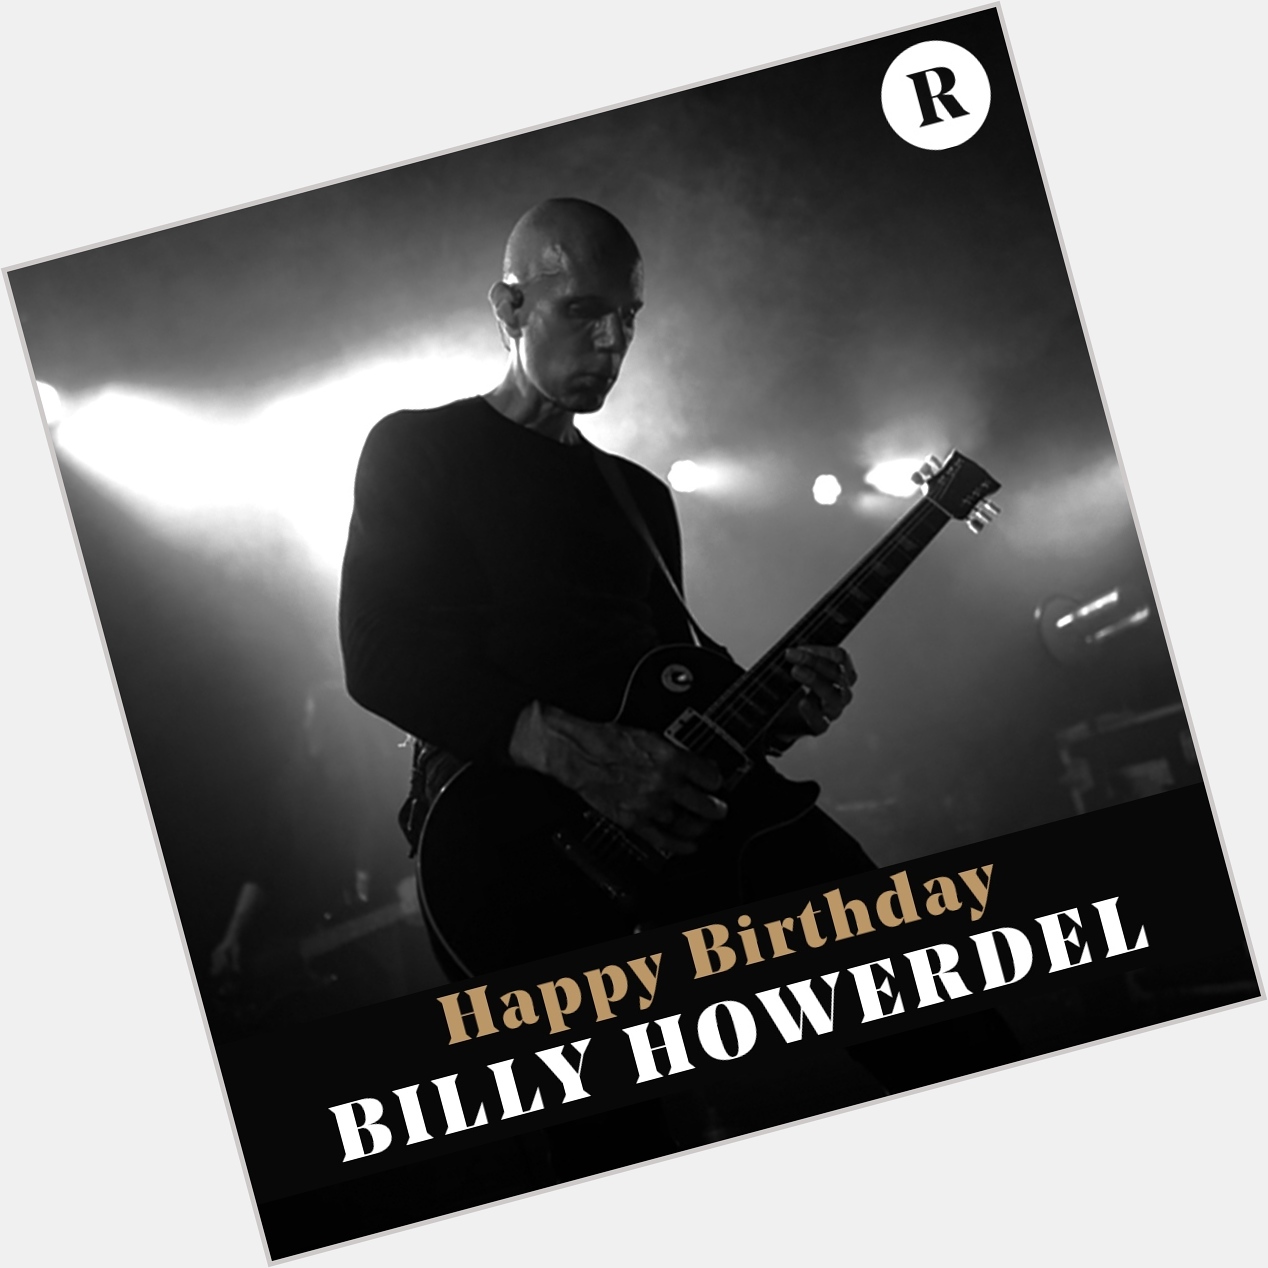  Happy birthday, Billy Howerdel! 

What\s you favorite song? : Justin Mohlman 